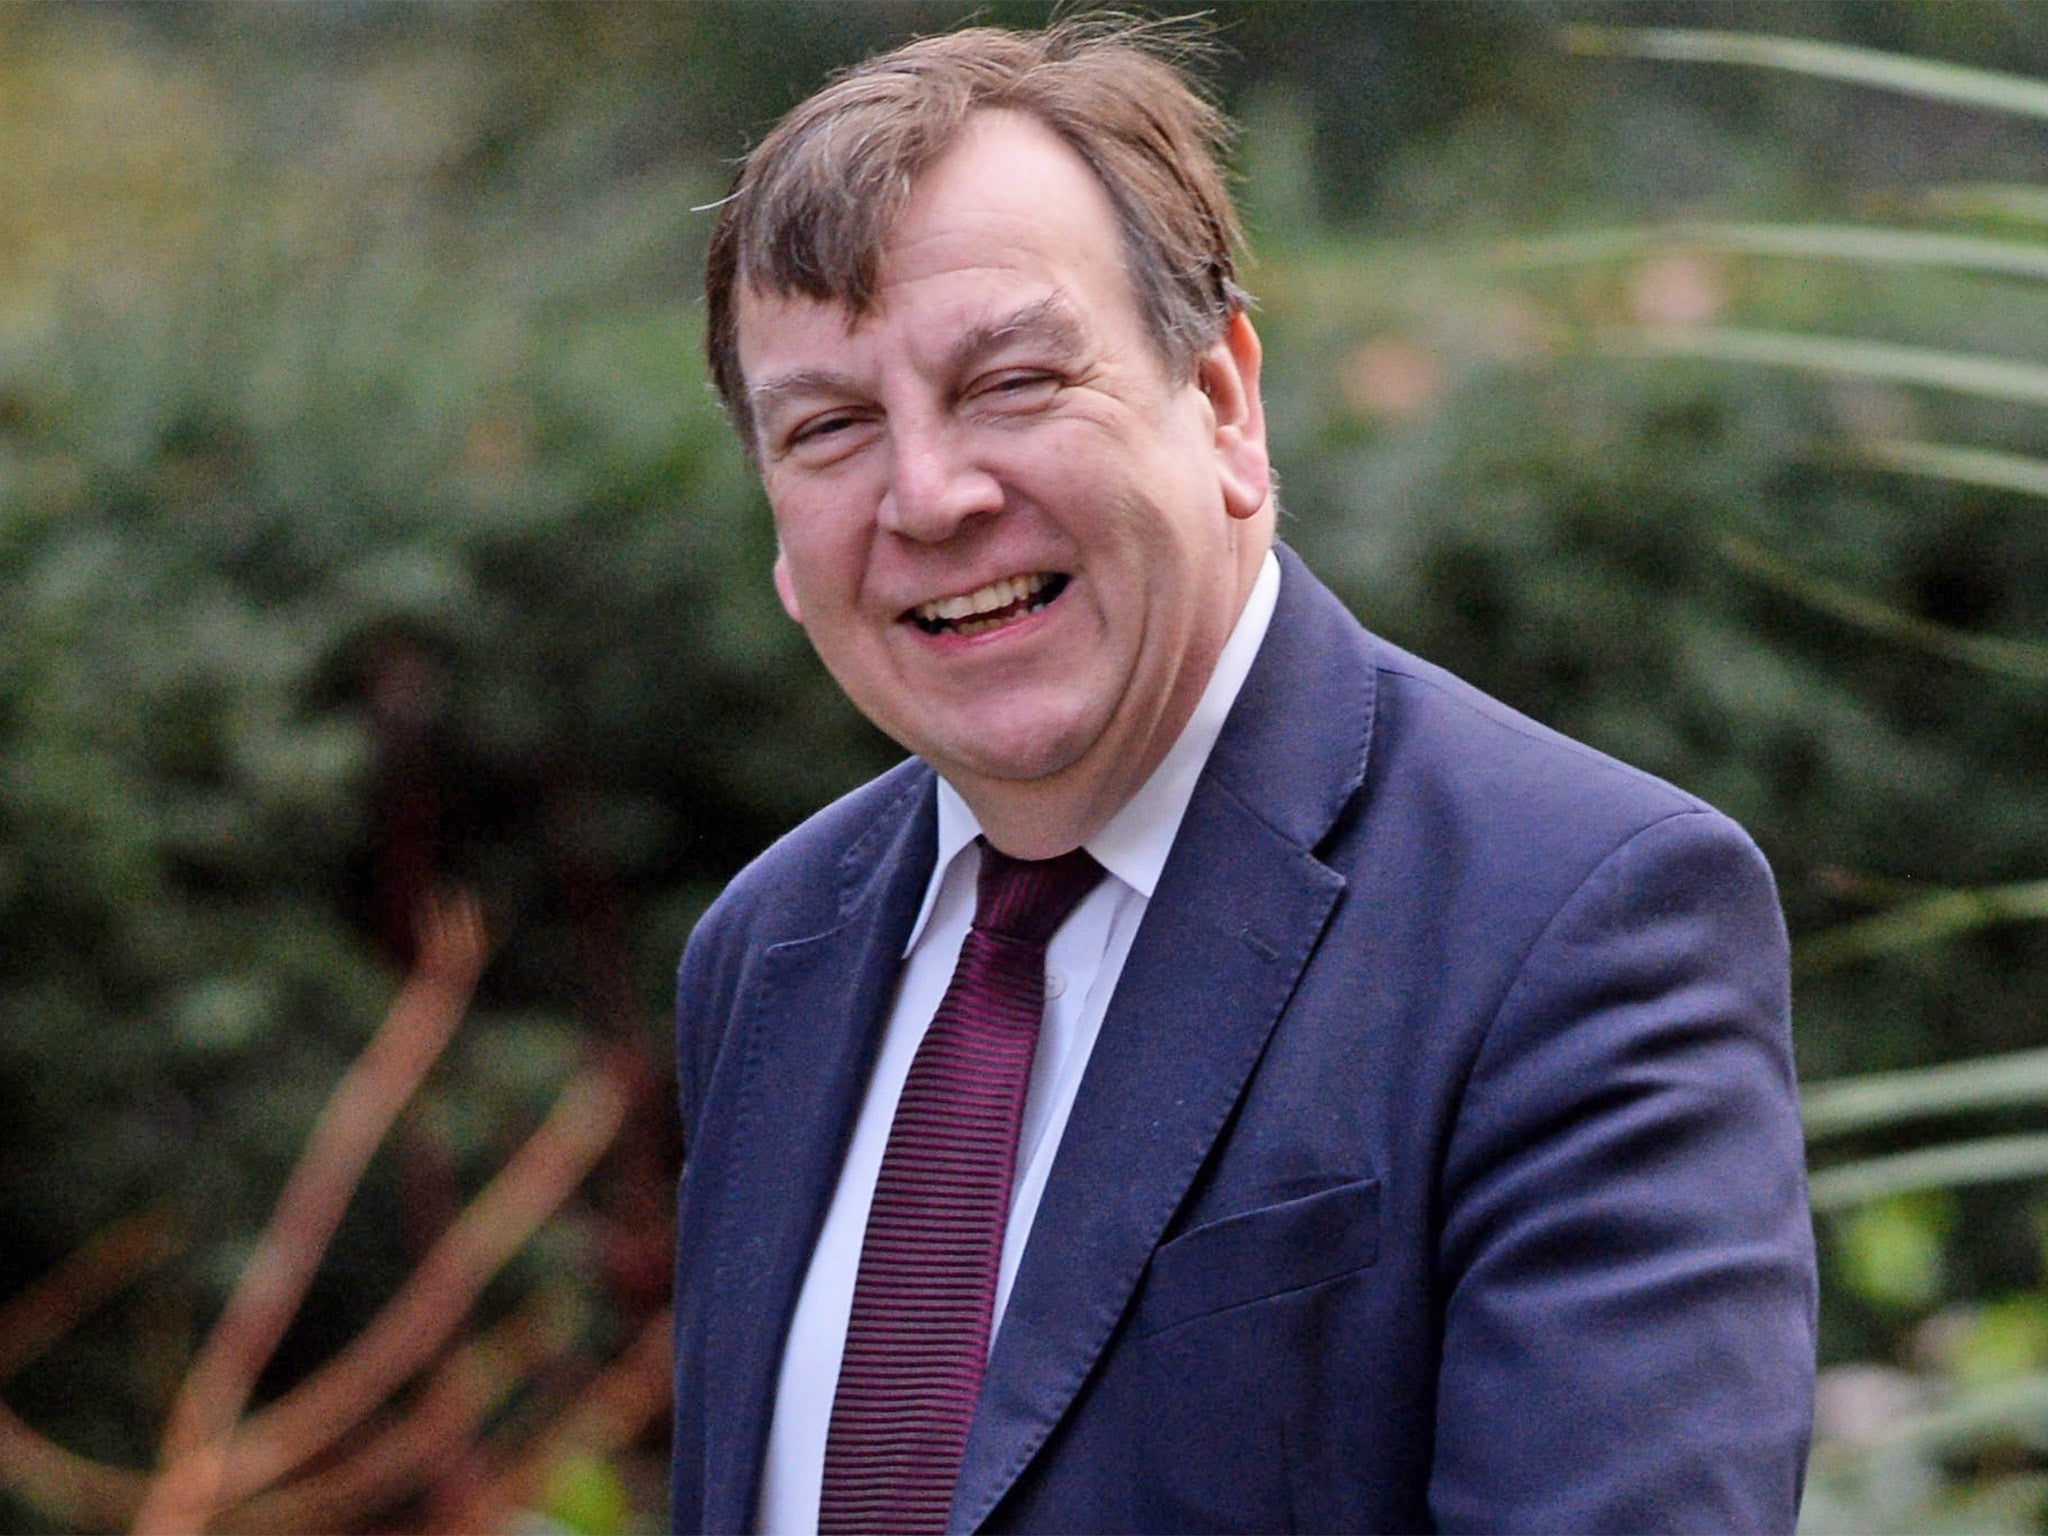 John Whittingdale, the Secretary of State for Culture, Media and Sport